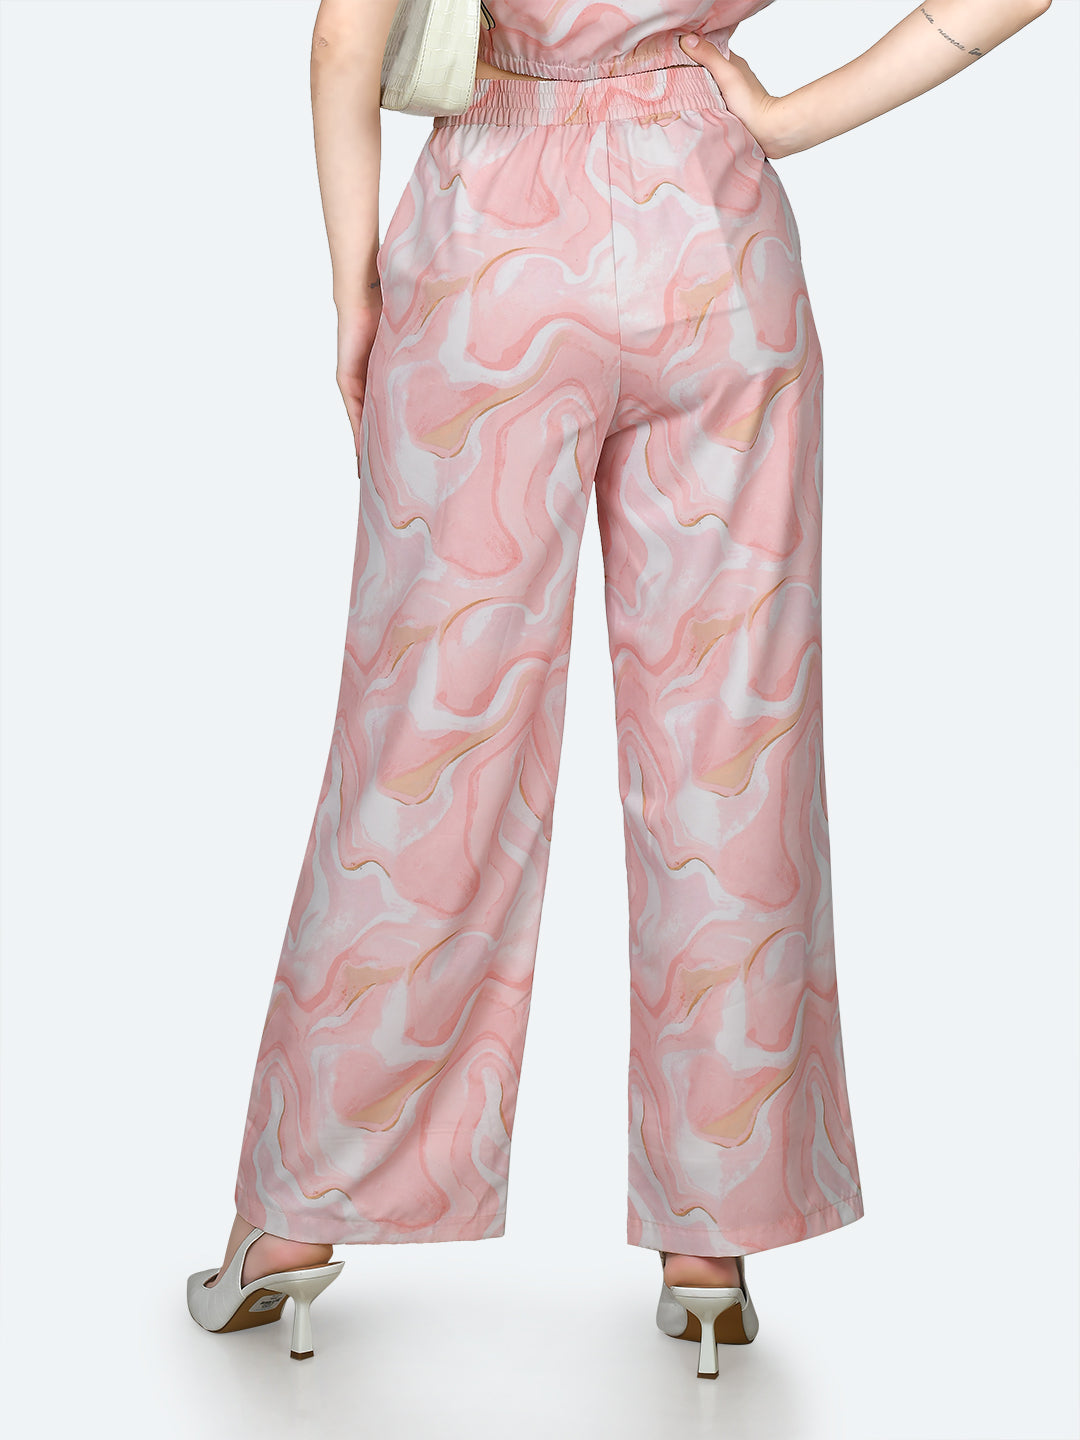 Peach Printed Trousers For Women